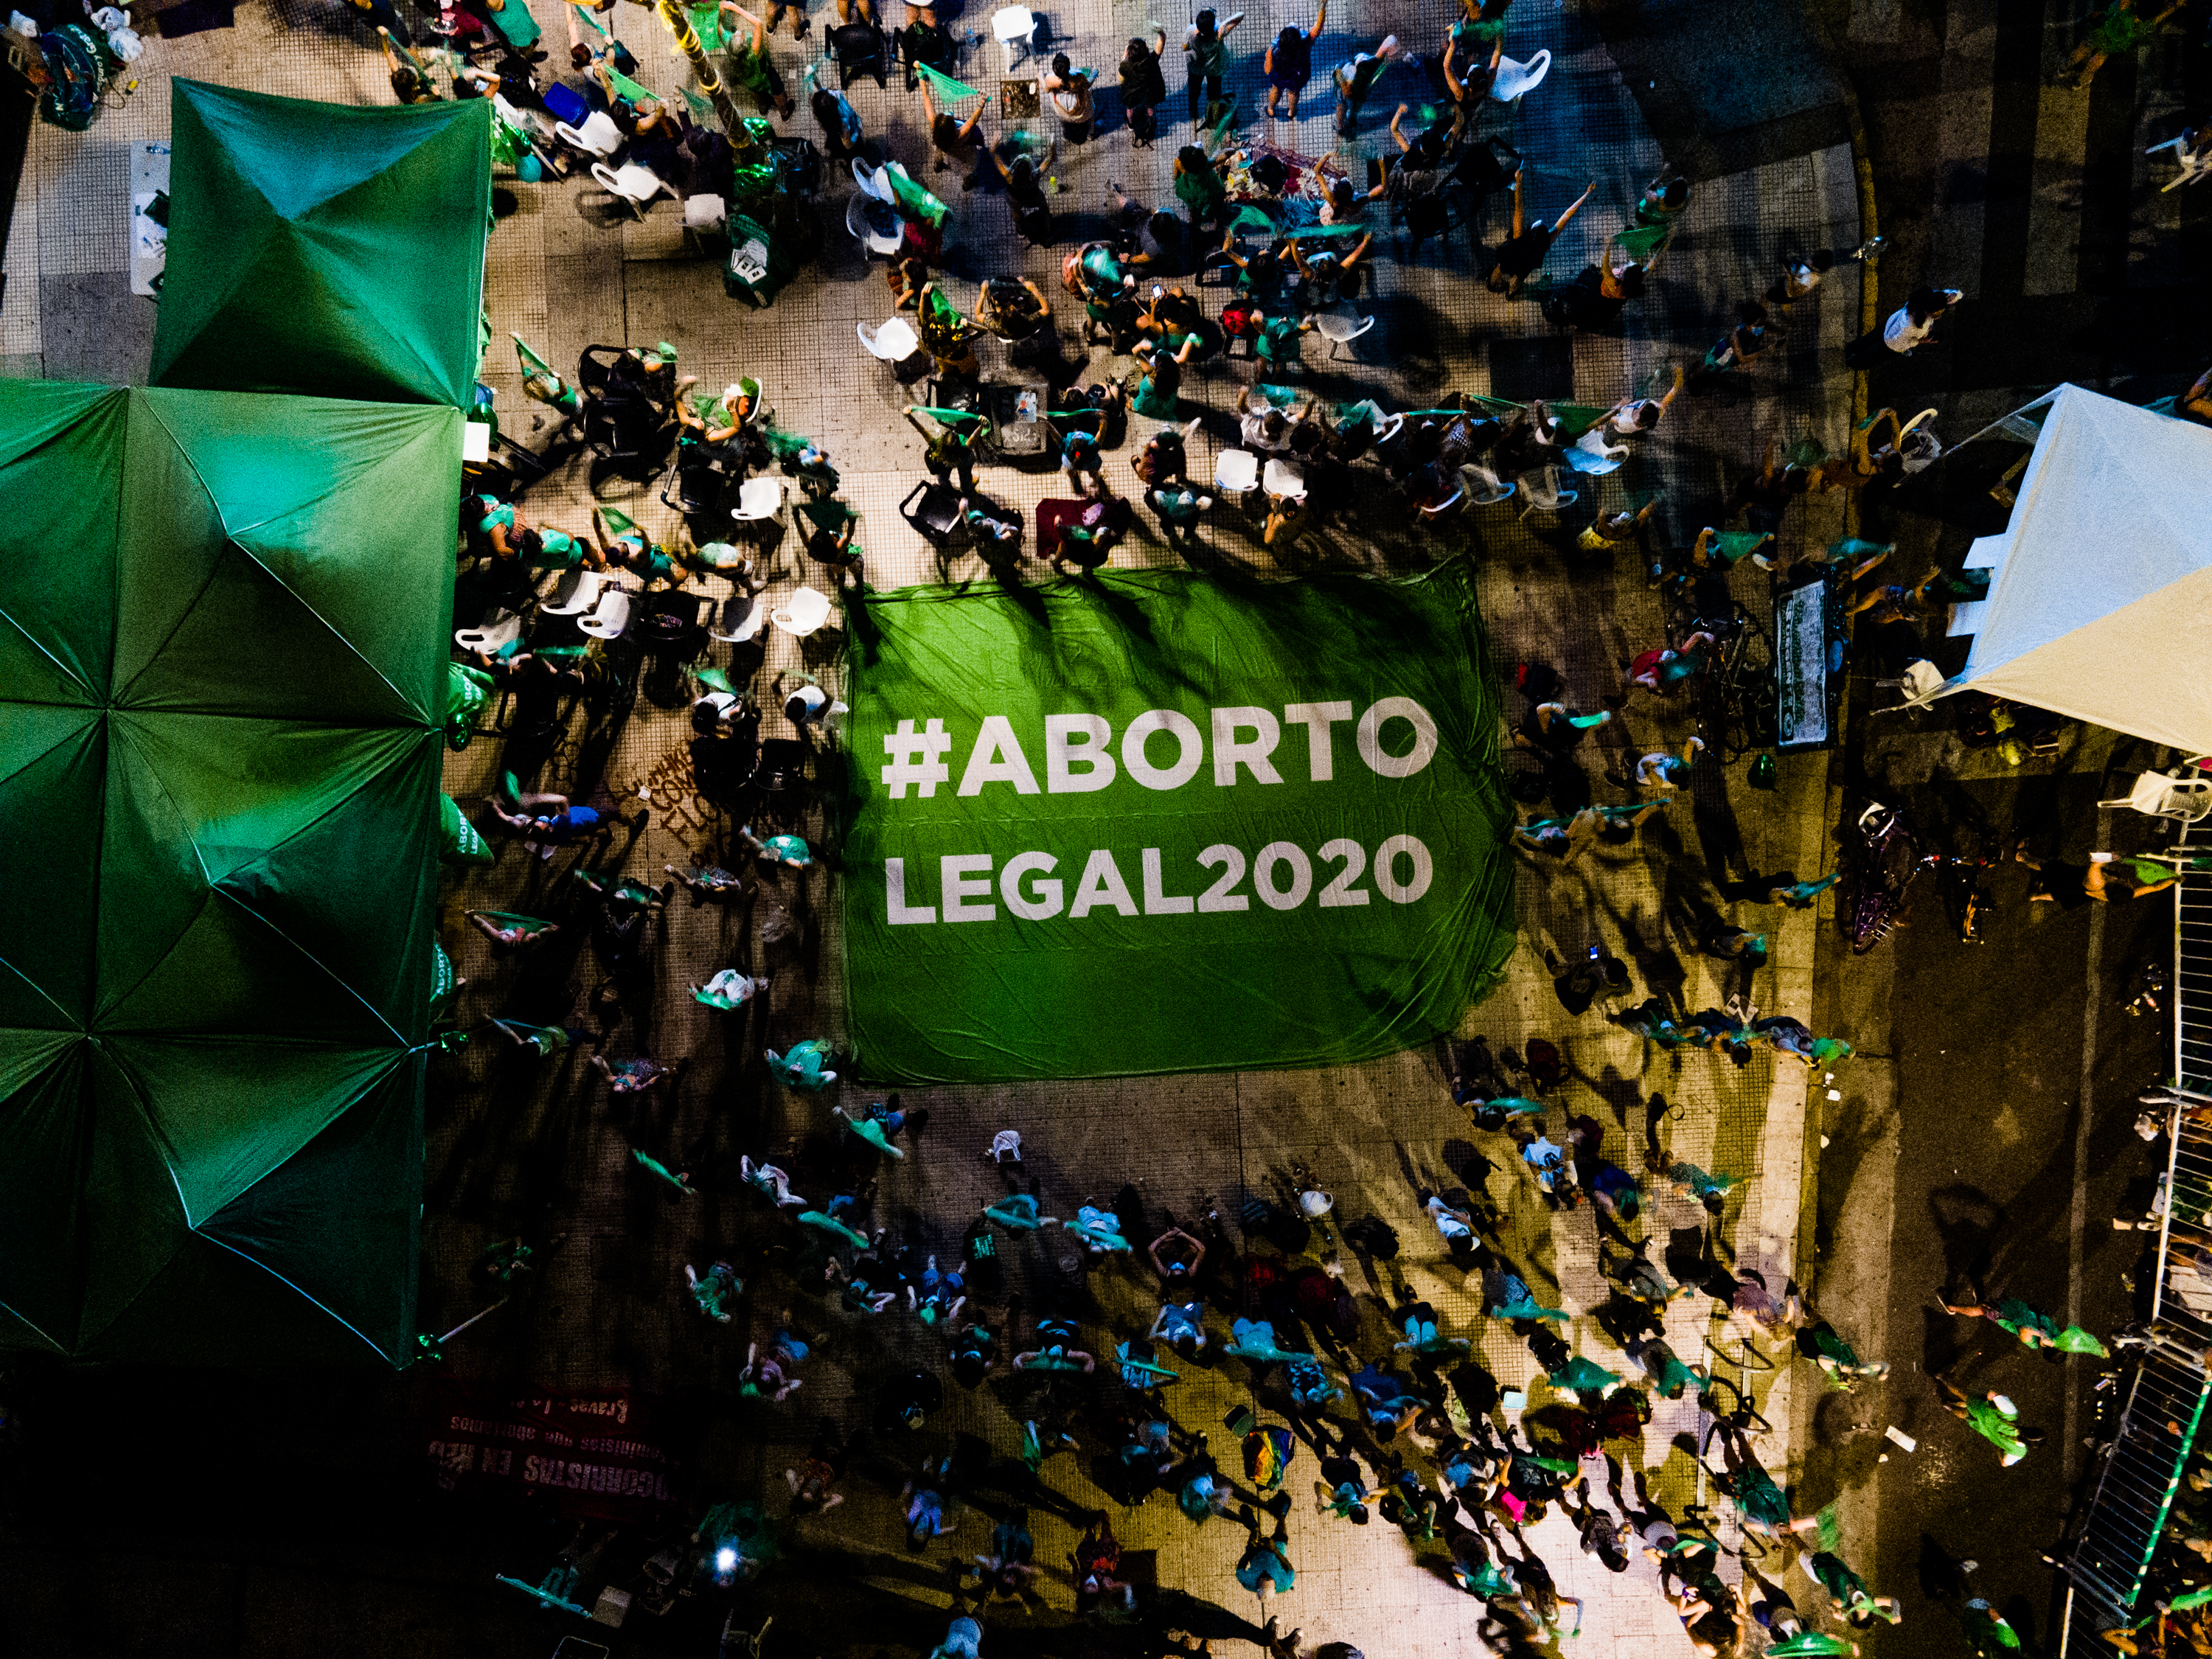 Pro-choice protesters in Argentina.